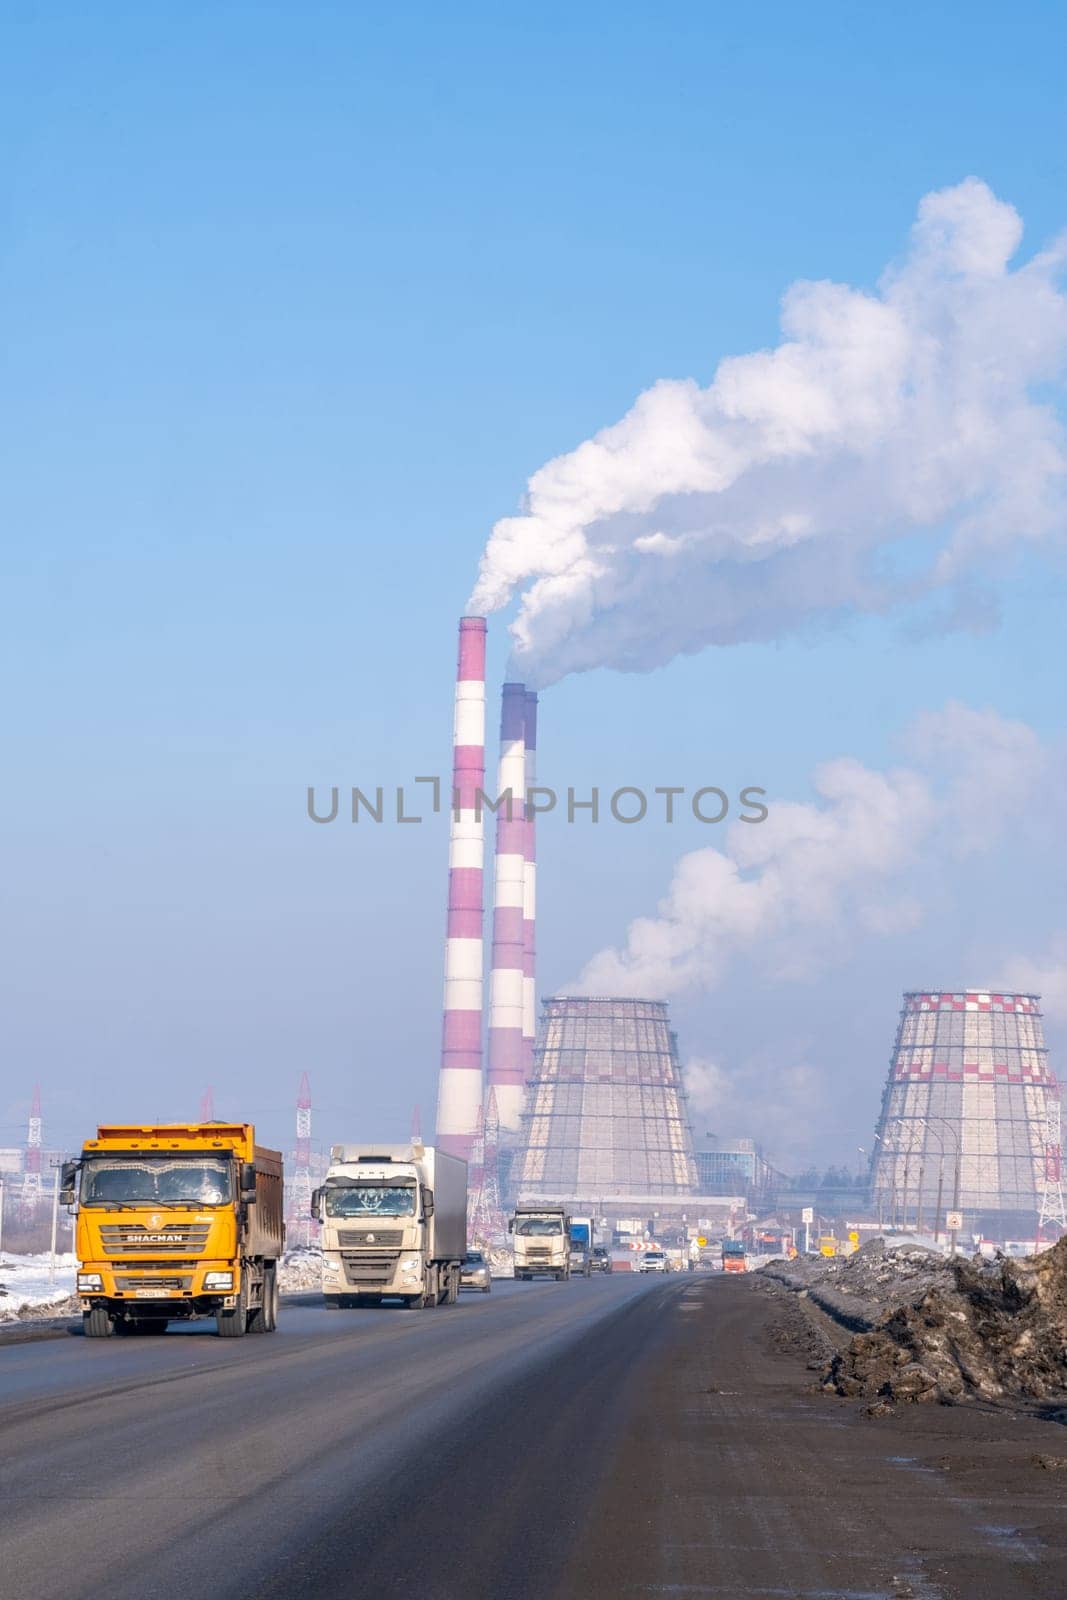 Naberezhnye Chelny, Russia, March 2, 2024. A factory with smoke billowing from its chimneys against the cloudy sky, as vehicles pass by on the asphalt road, reflecting in automotive sideview mirrors